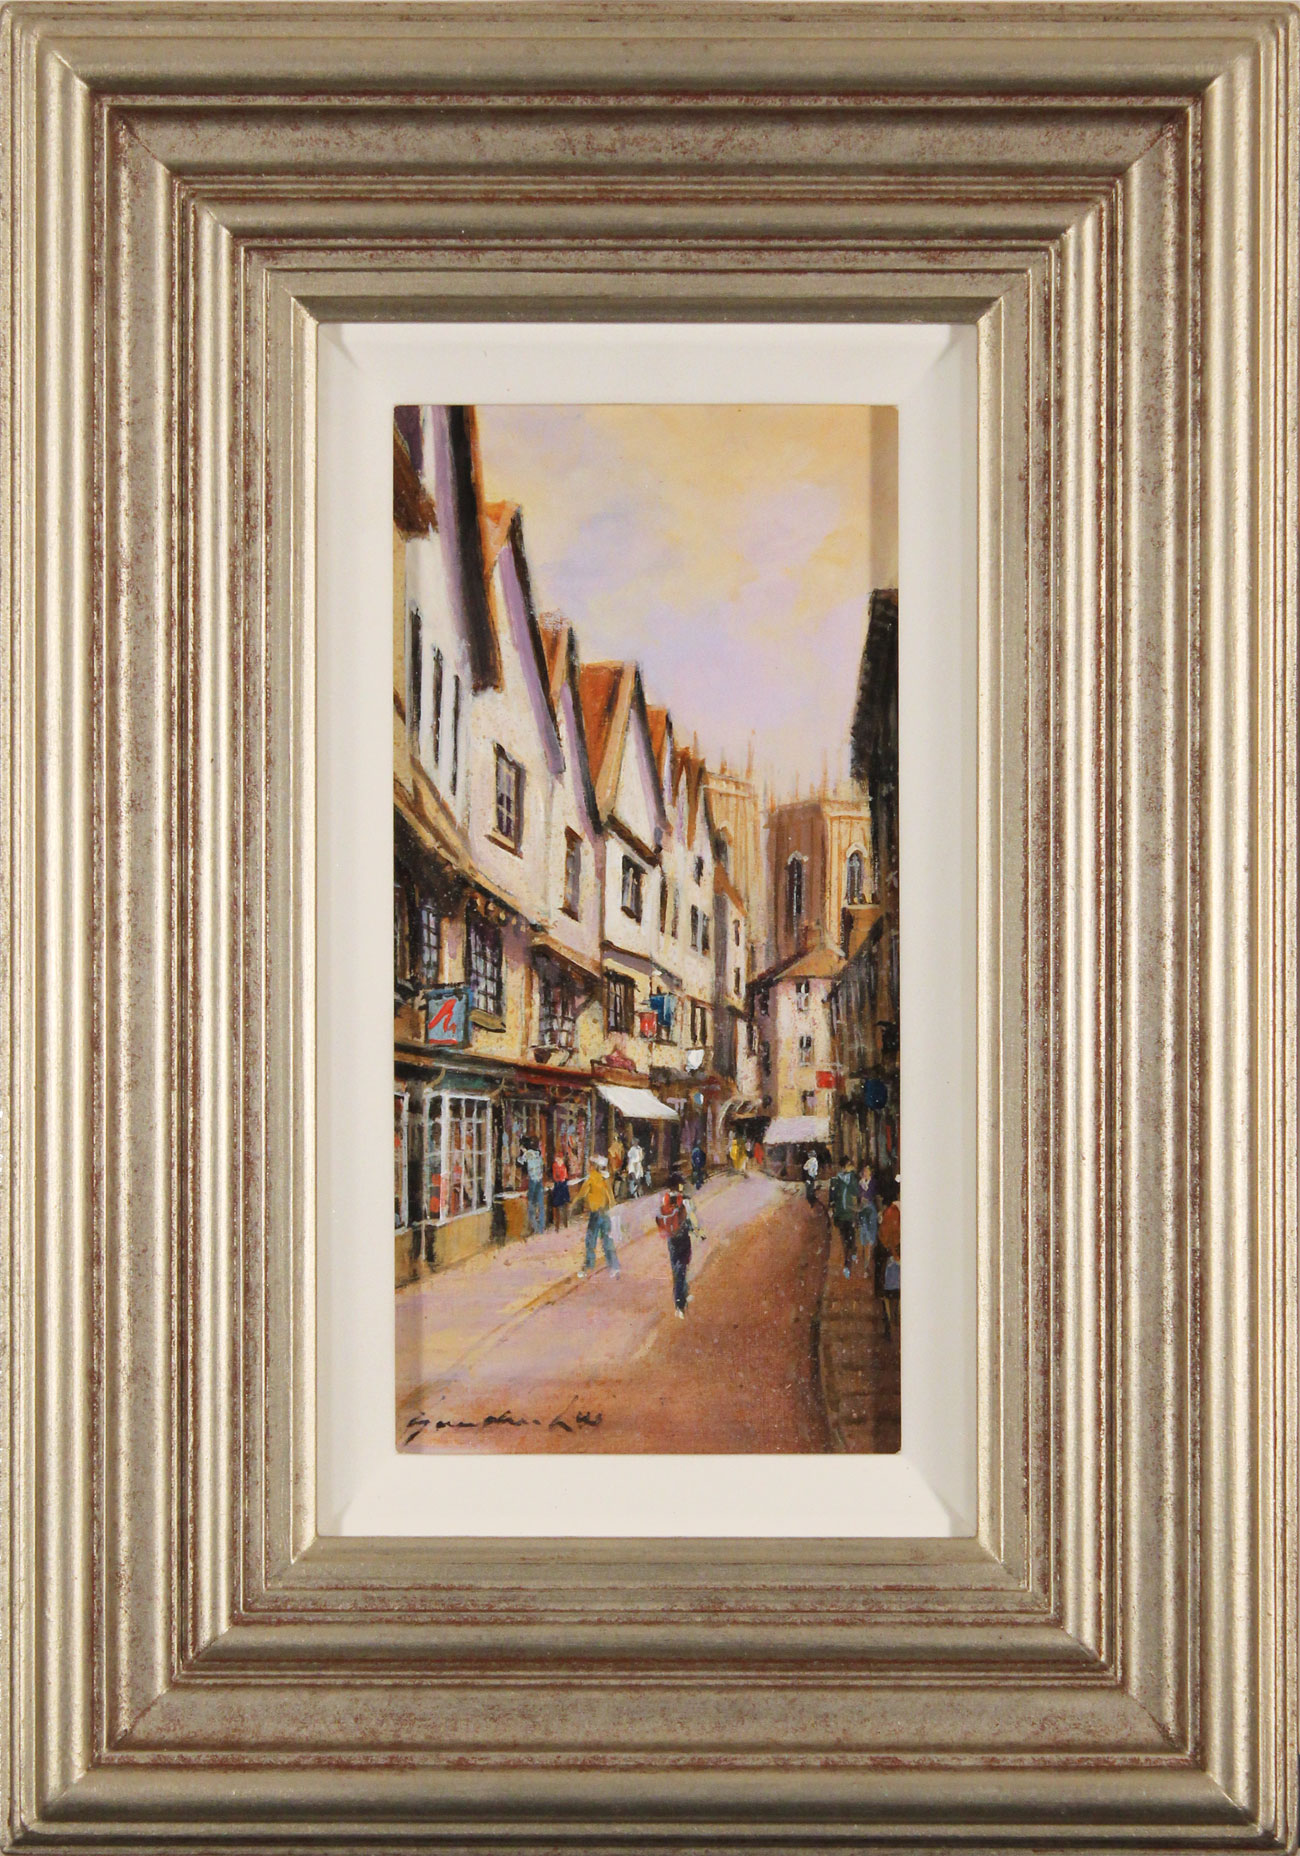 Gordon Lees, Original oil painting on panel, A Day Out in York